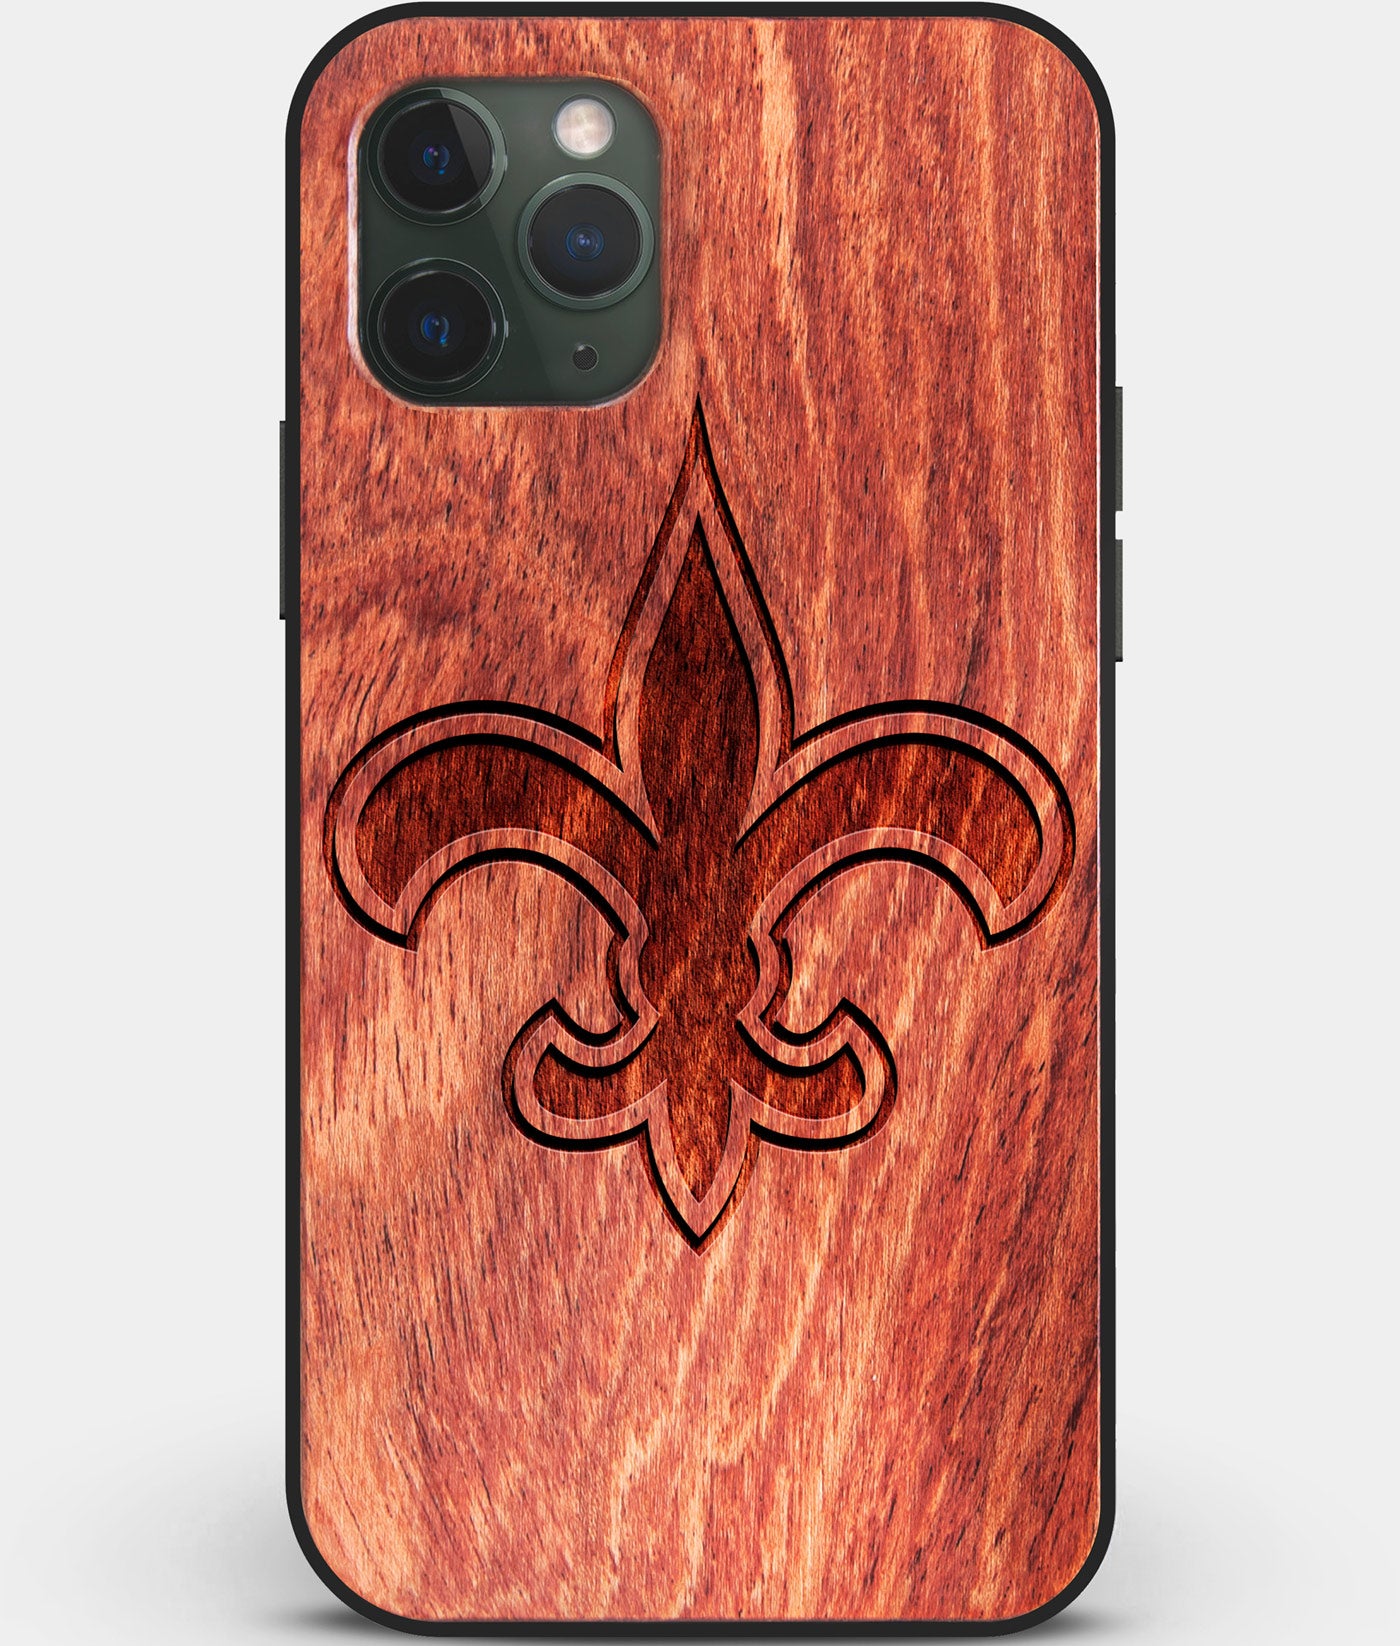 Custom Carved Wood New Orleans Saints iPhone 11 Pro Case | Personalized Mahogany Wood New Orleans Saints Cover, Birthday Gift, Gifts For Him, Monogrammed Gift For Fan | by Engraved In Nature